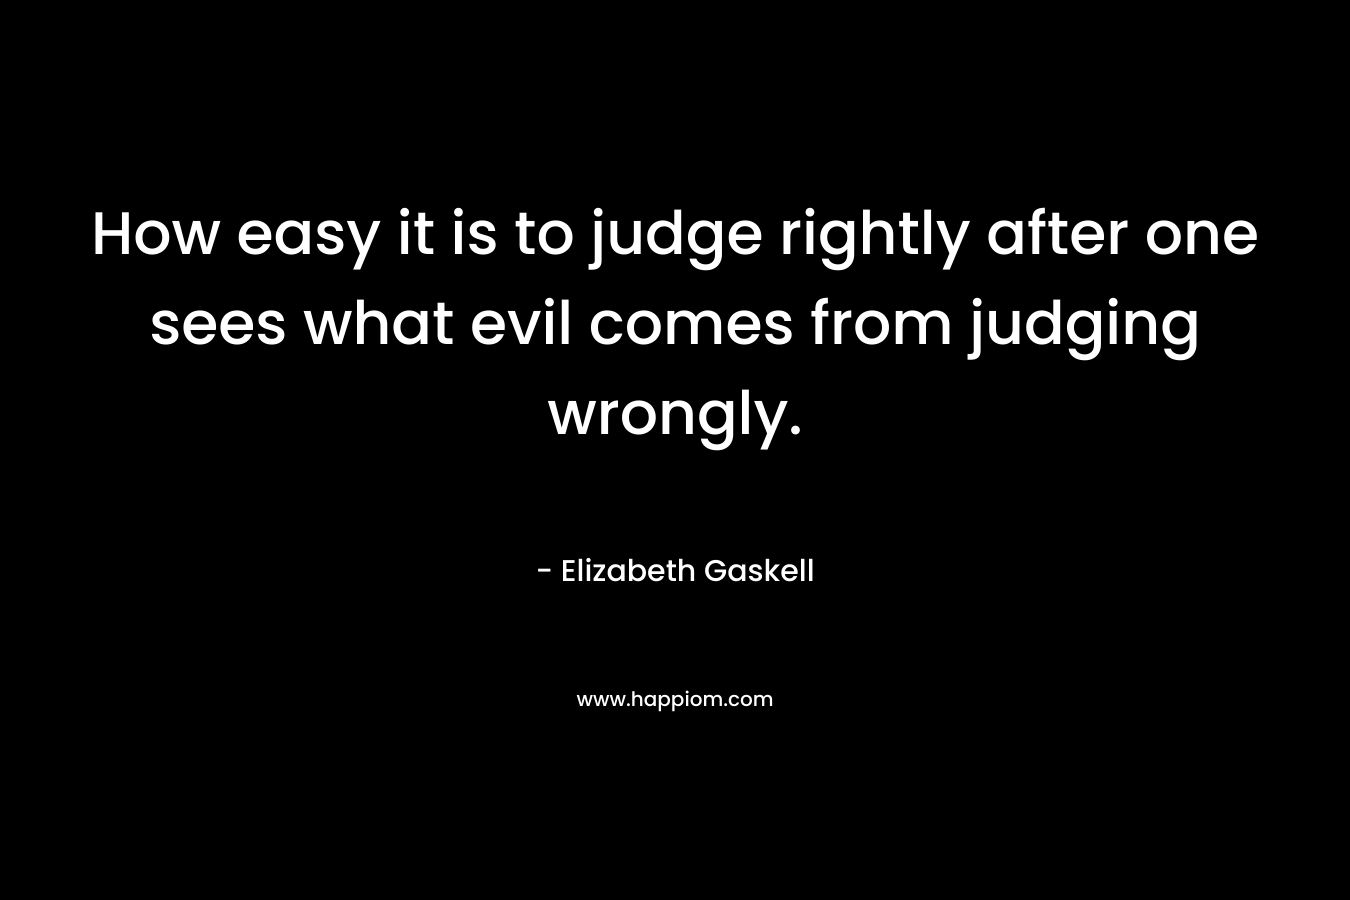 How easy it is to judge rightly after one sees what evil comes from judging wrongly.